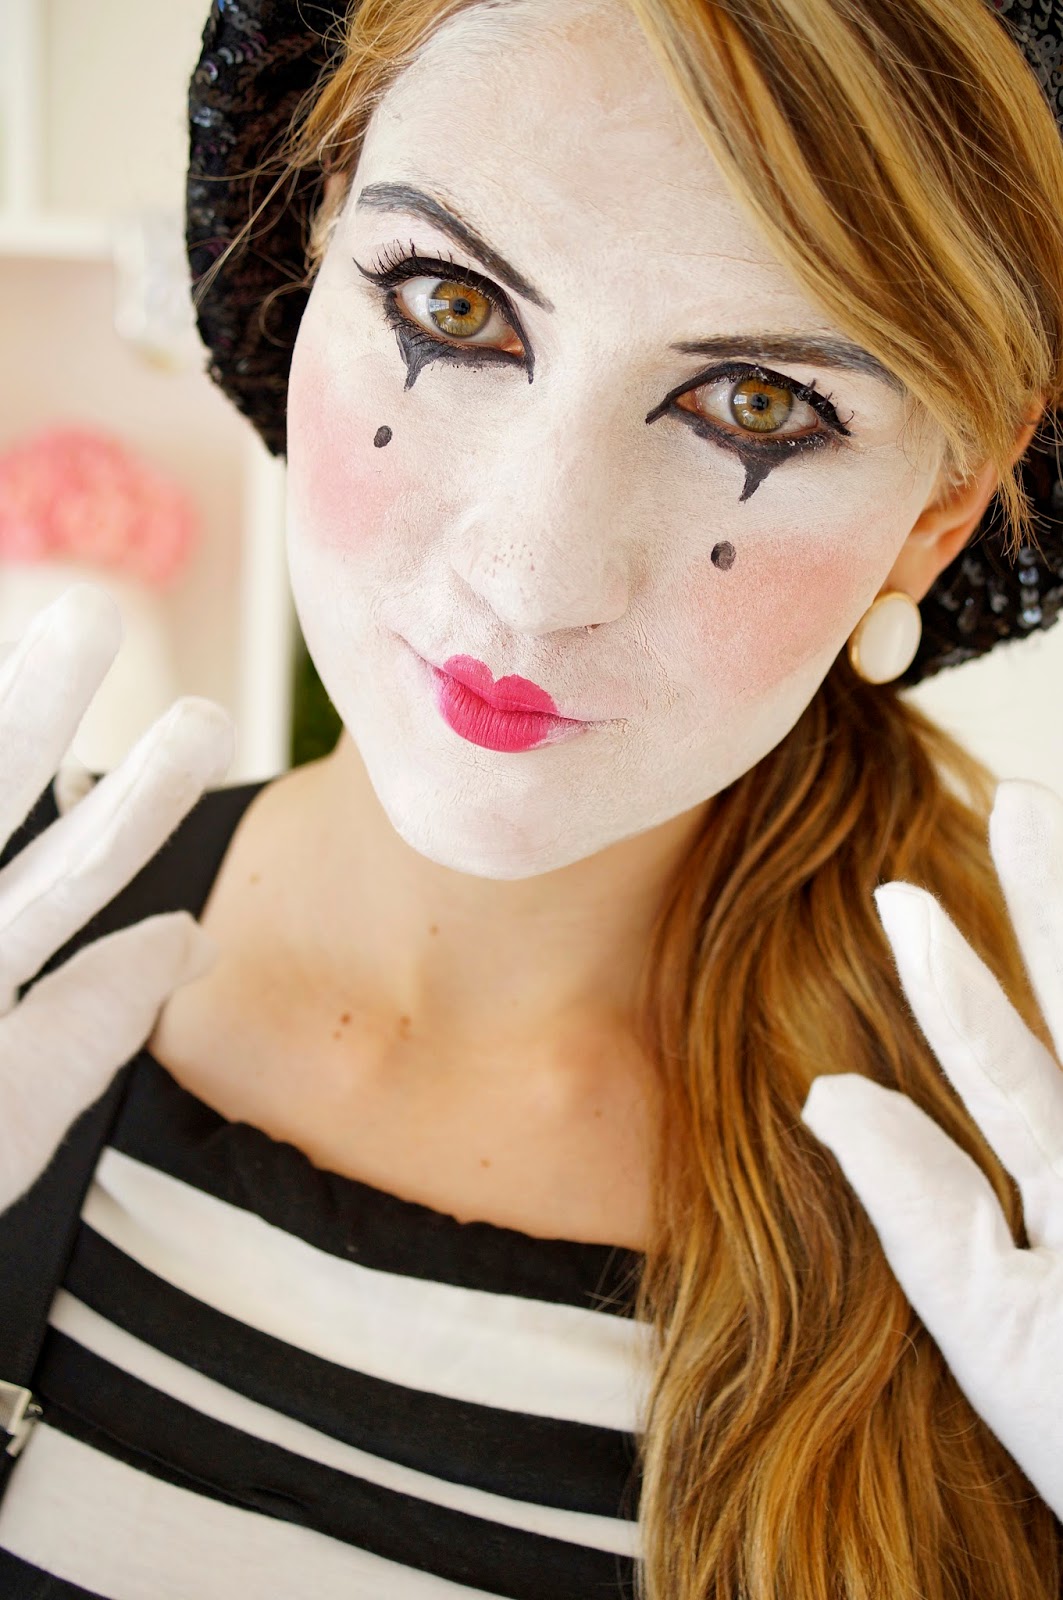 Homemade Mime Halloween Costume. Click through for tutorial